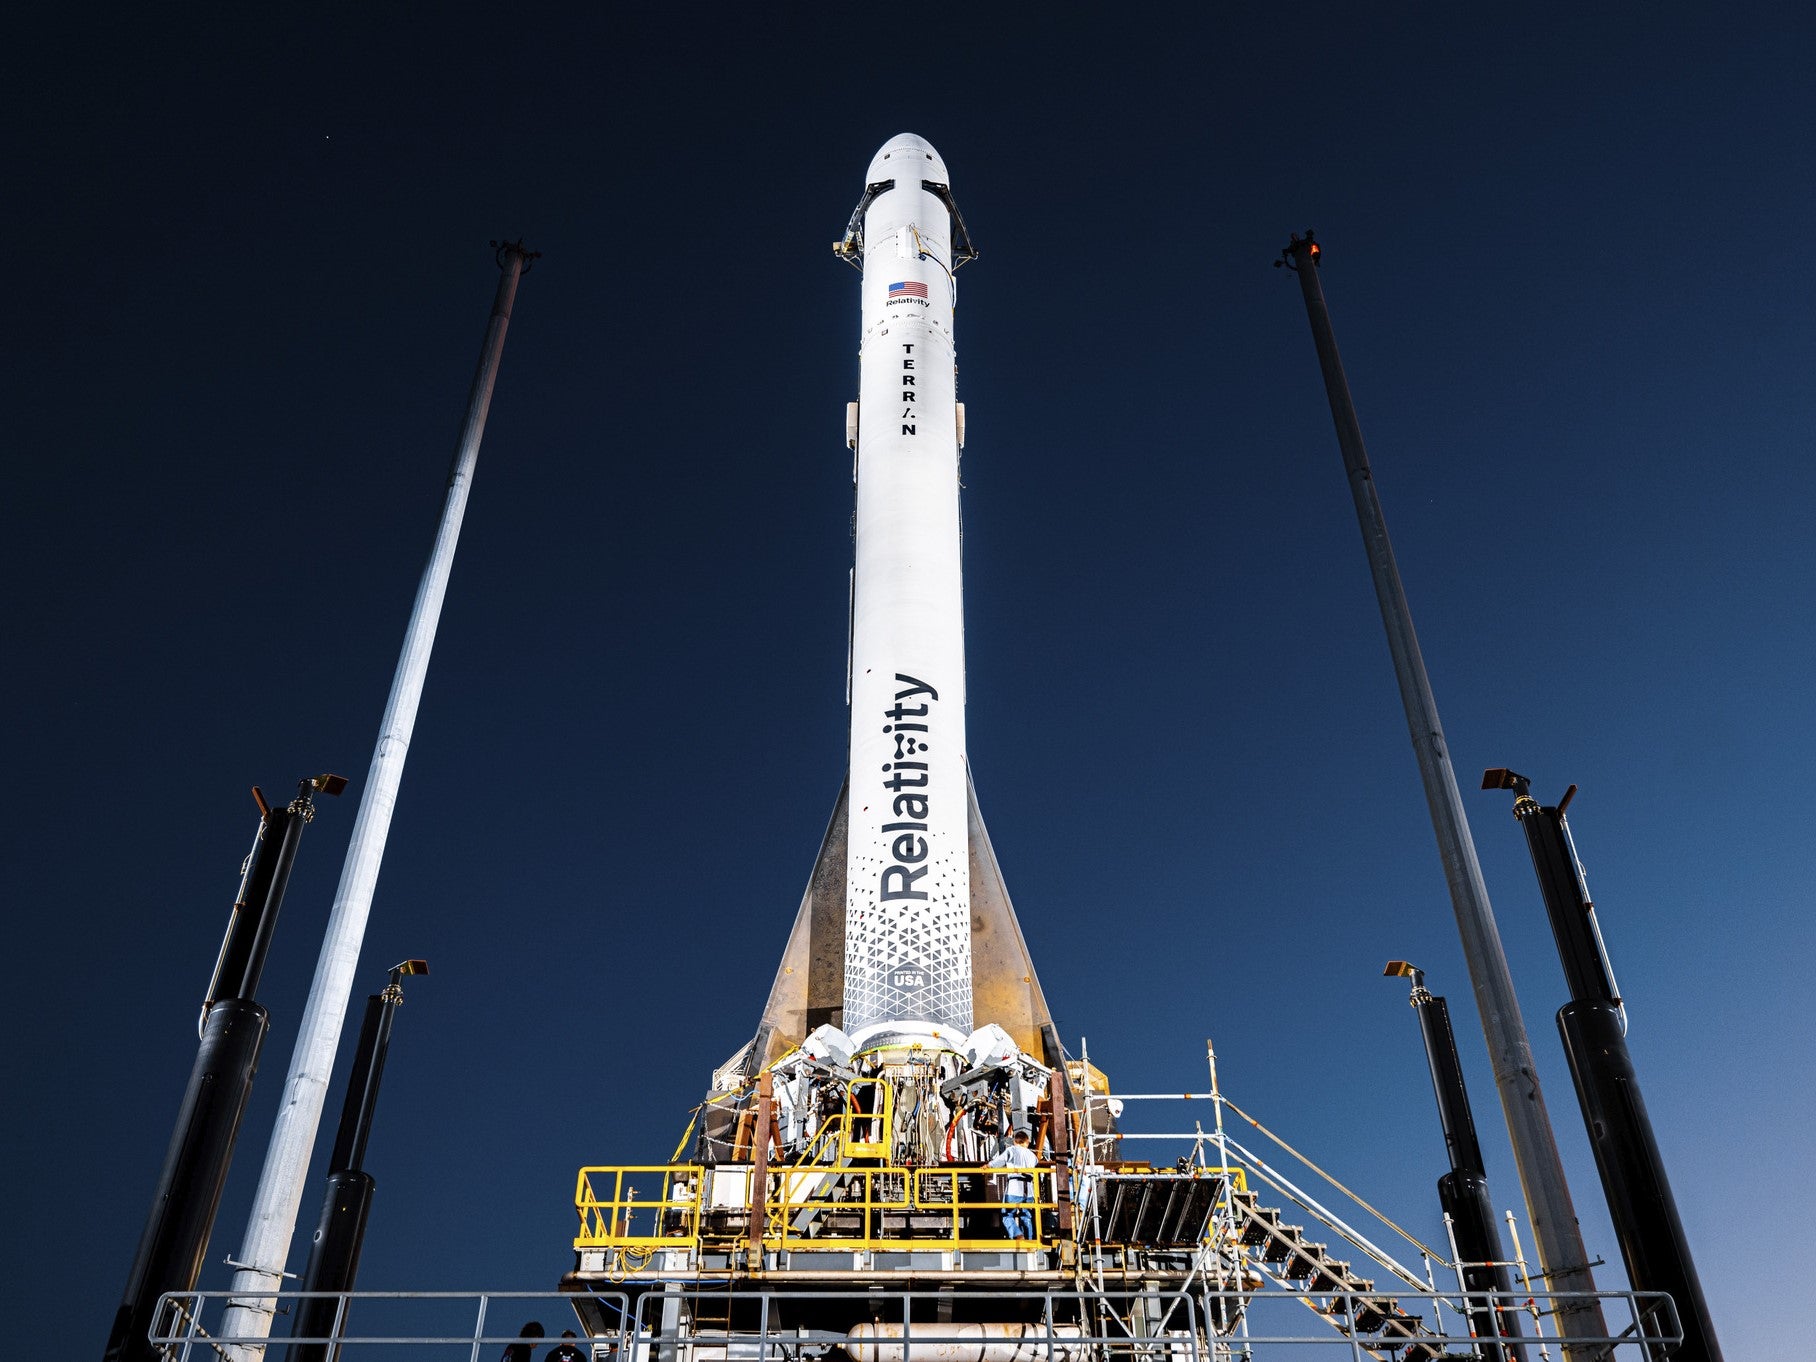 At 33.5m tall, the Terran 1 is the largest 3D printed object to attempt orbital flight